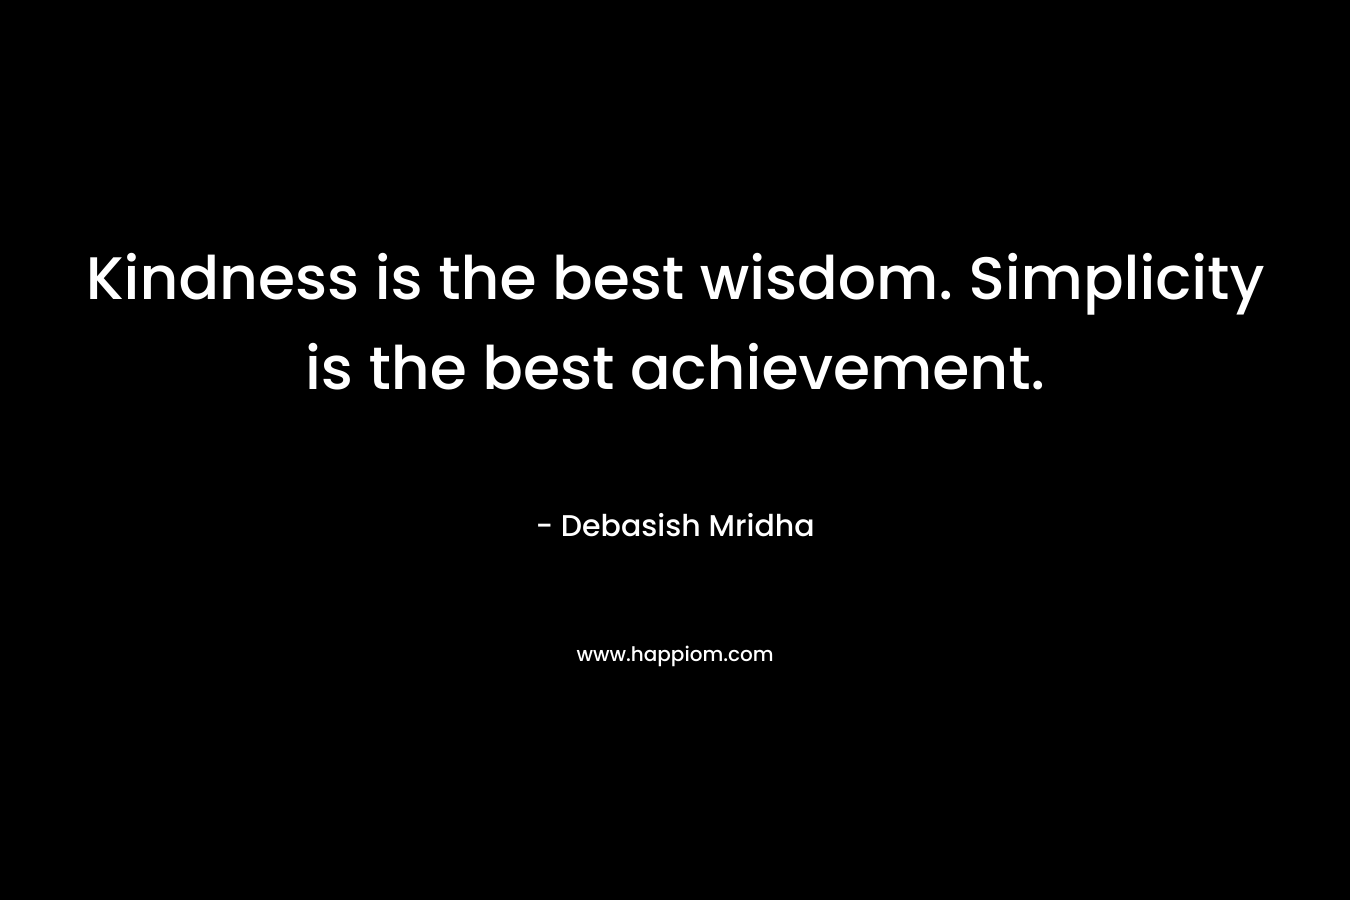 Kindness is the best wisdom. Simplicity is the best achievement.